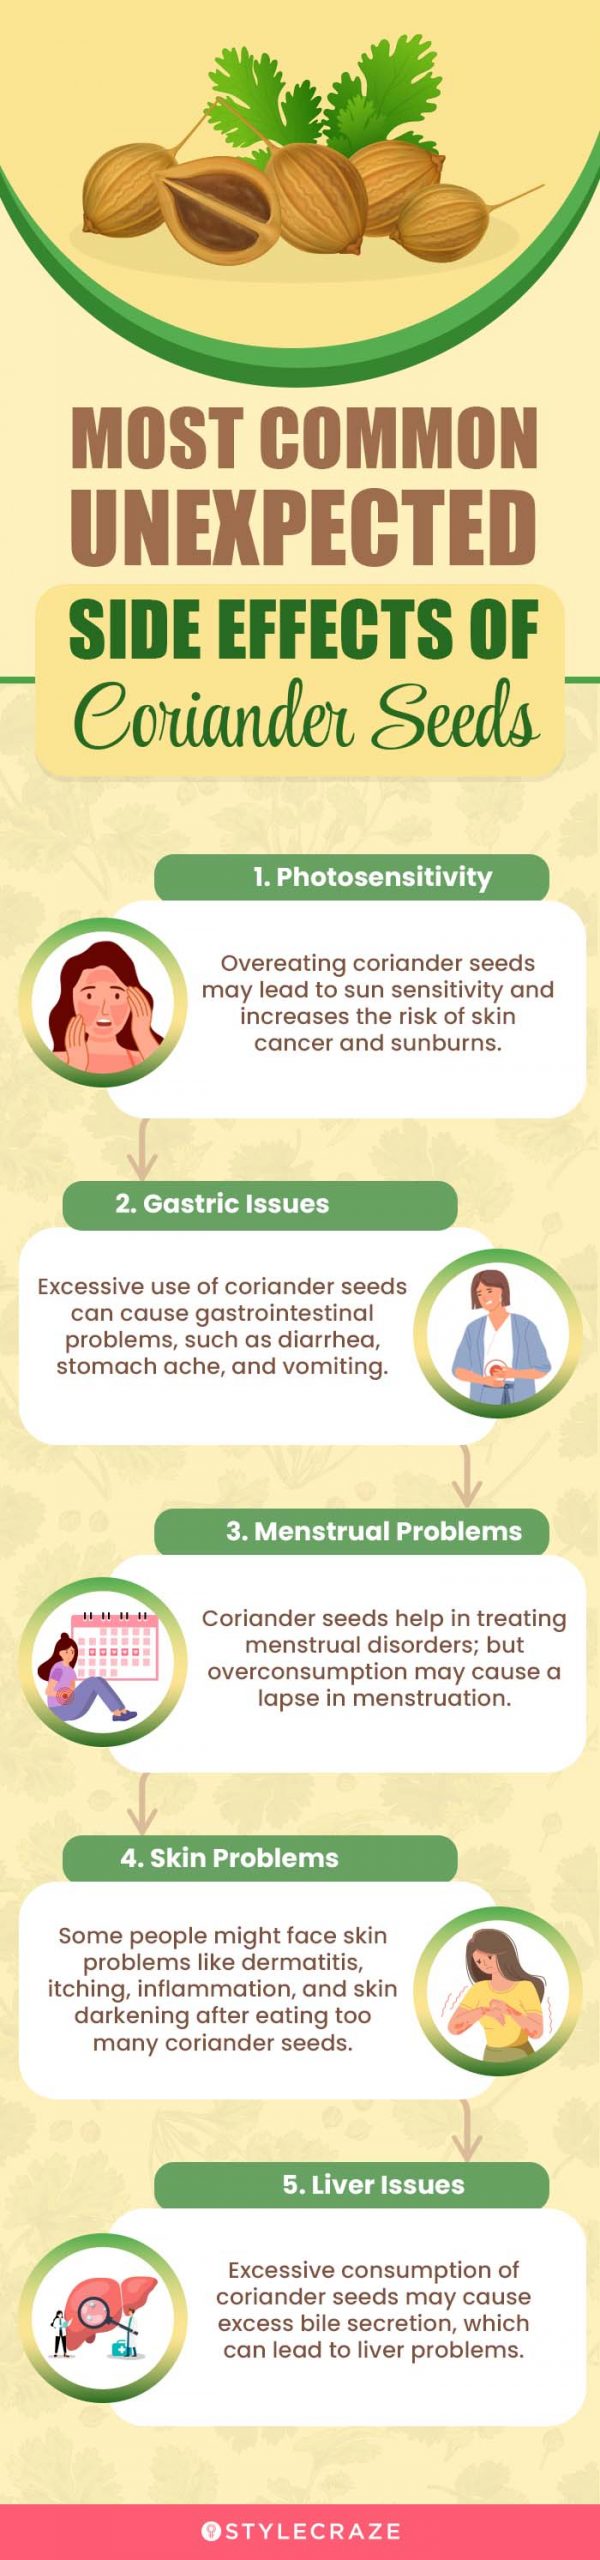 most common unexpected side effects of coriander seeds [infographic]